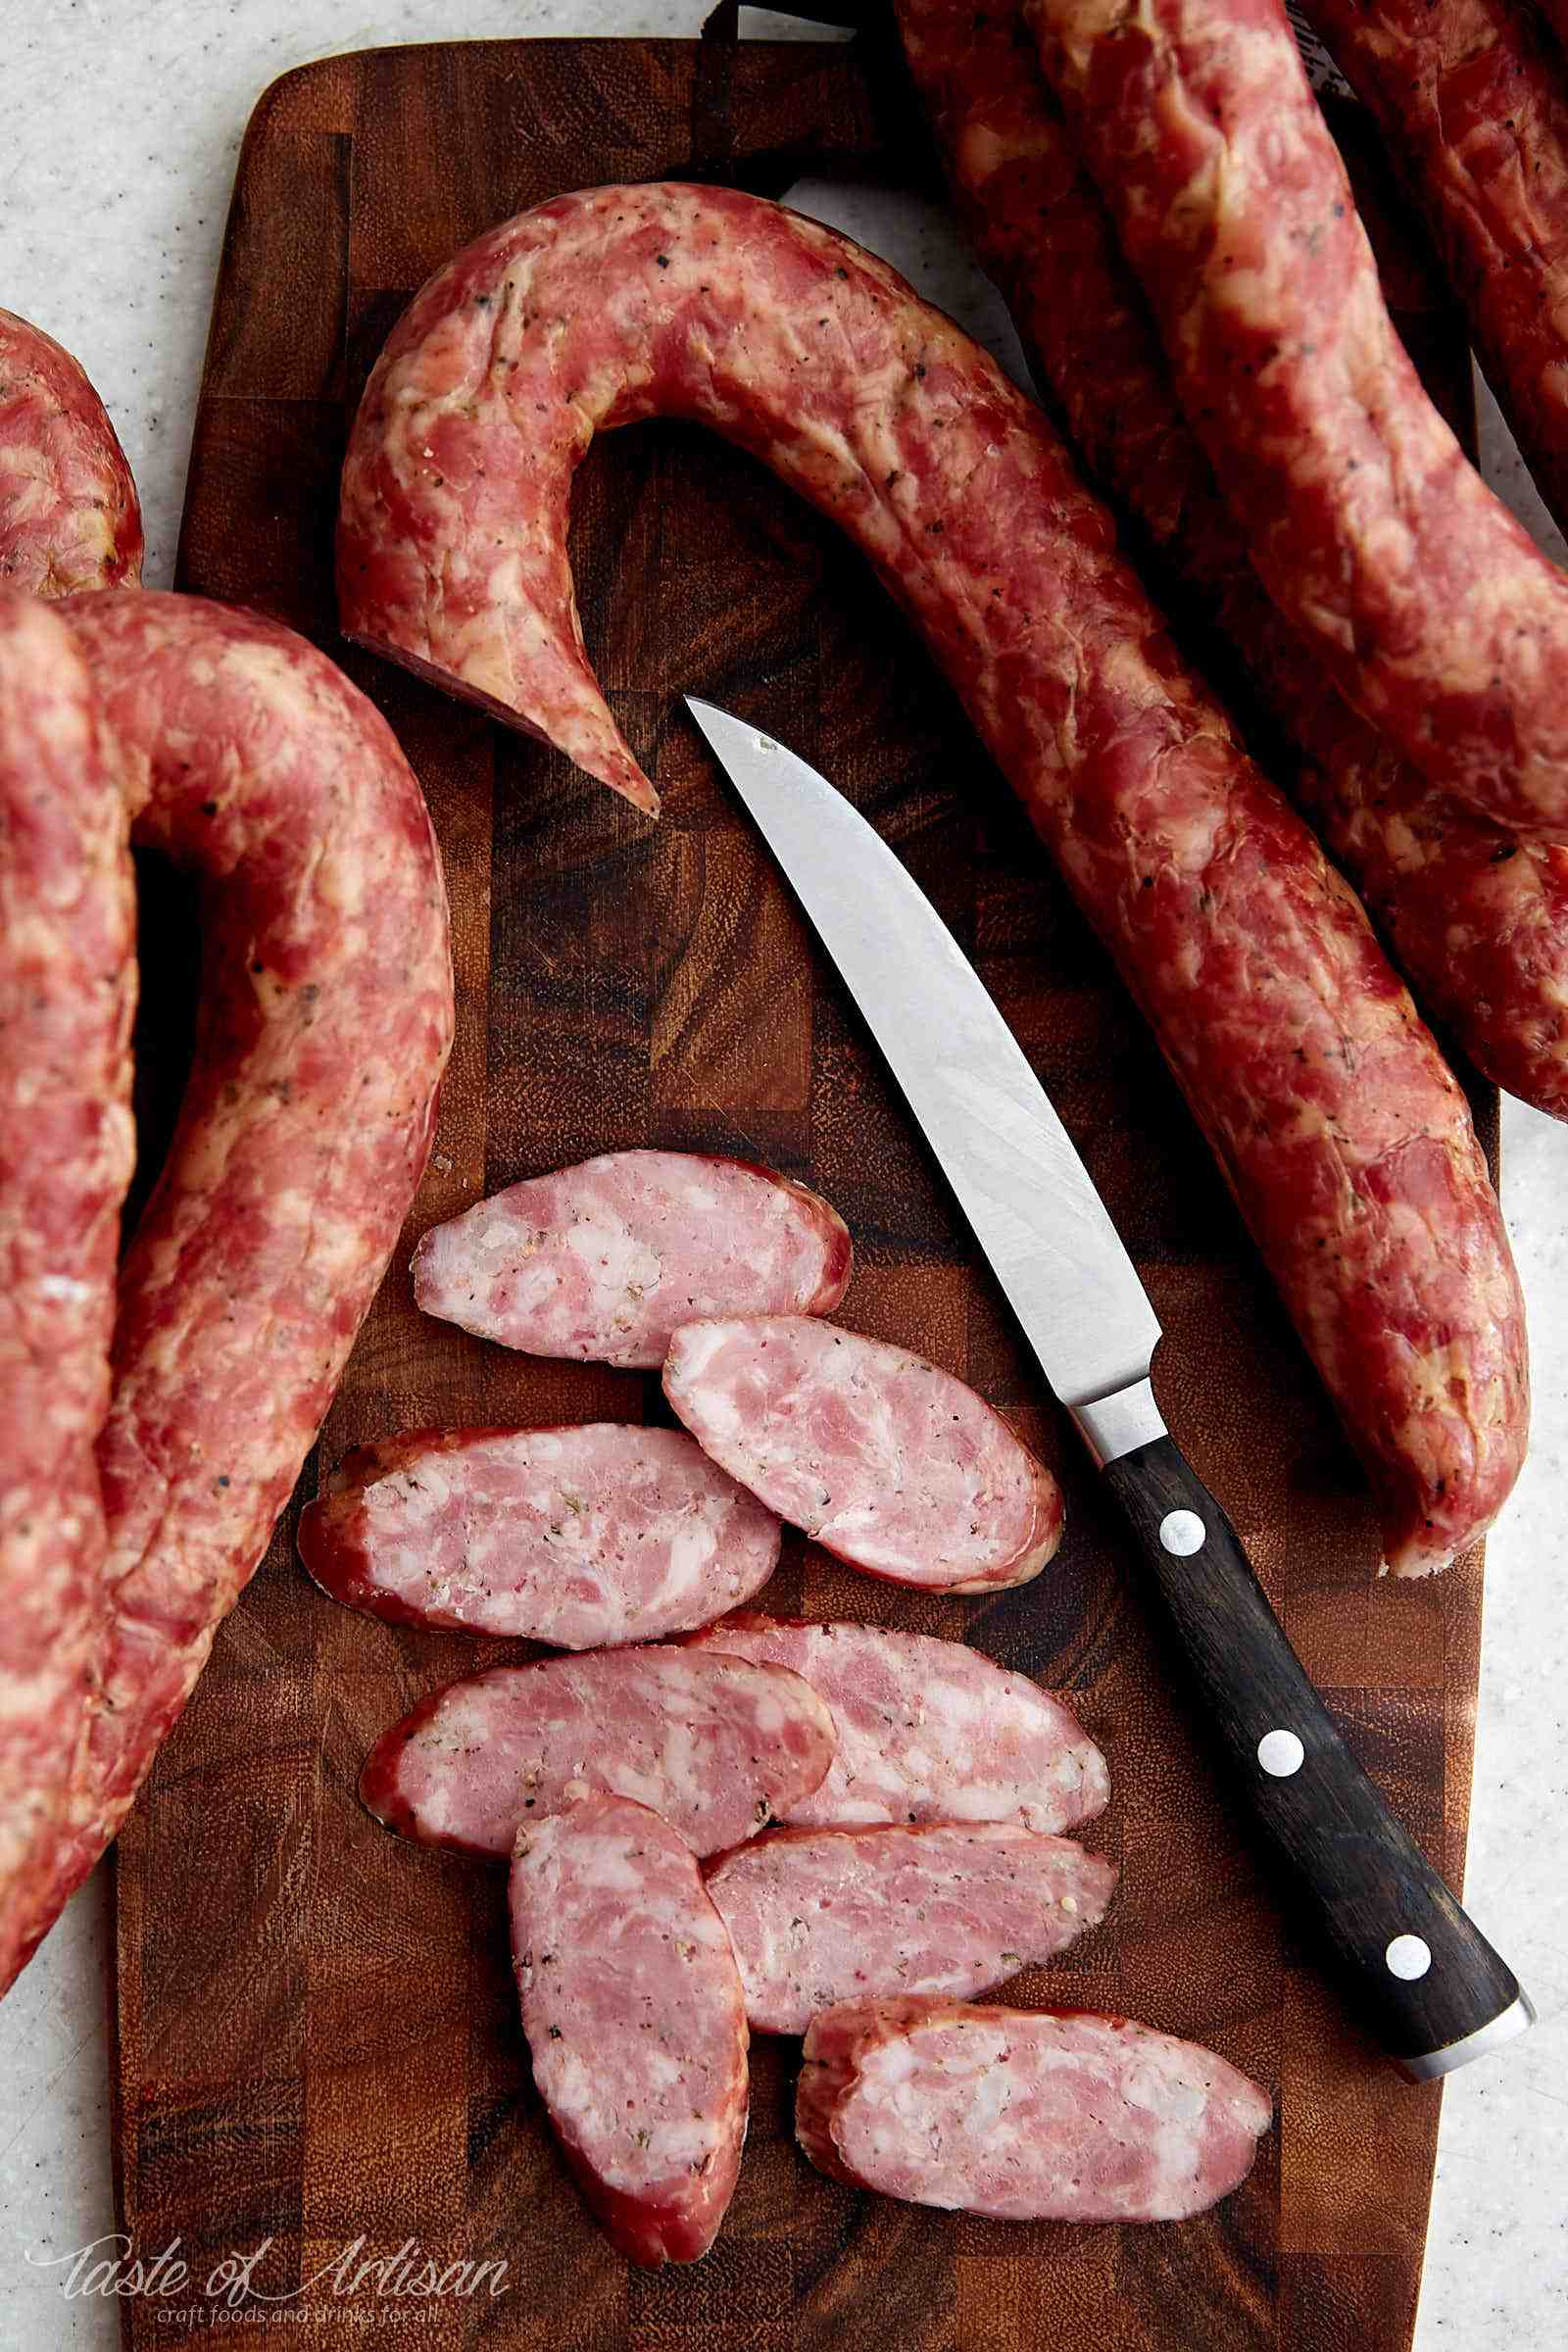 What makes Polish sausage different?